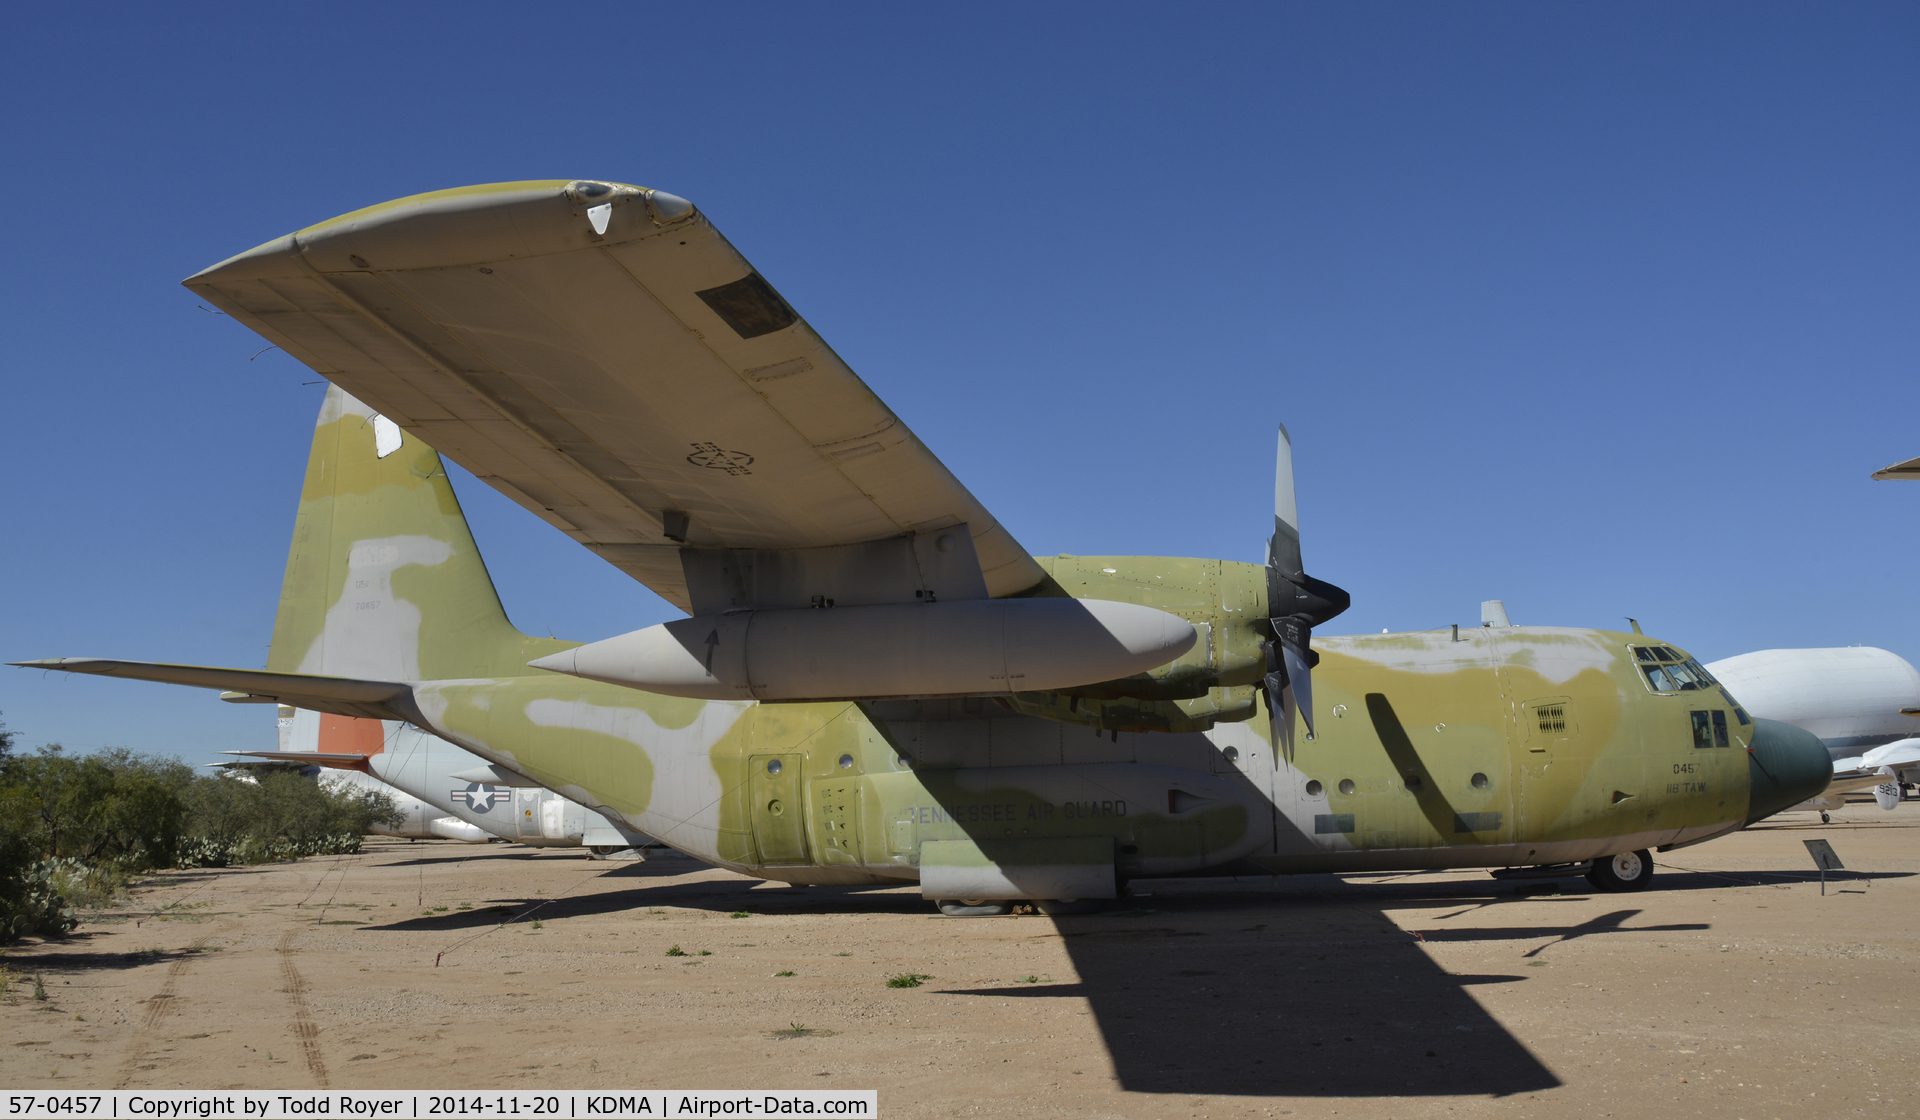 57-0457, 1957 Lockheed C-130A Hercules C/N 182-3164, On display at the Pima Air and Space Museum